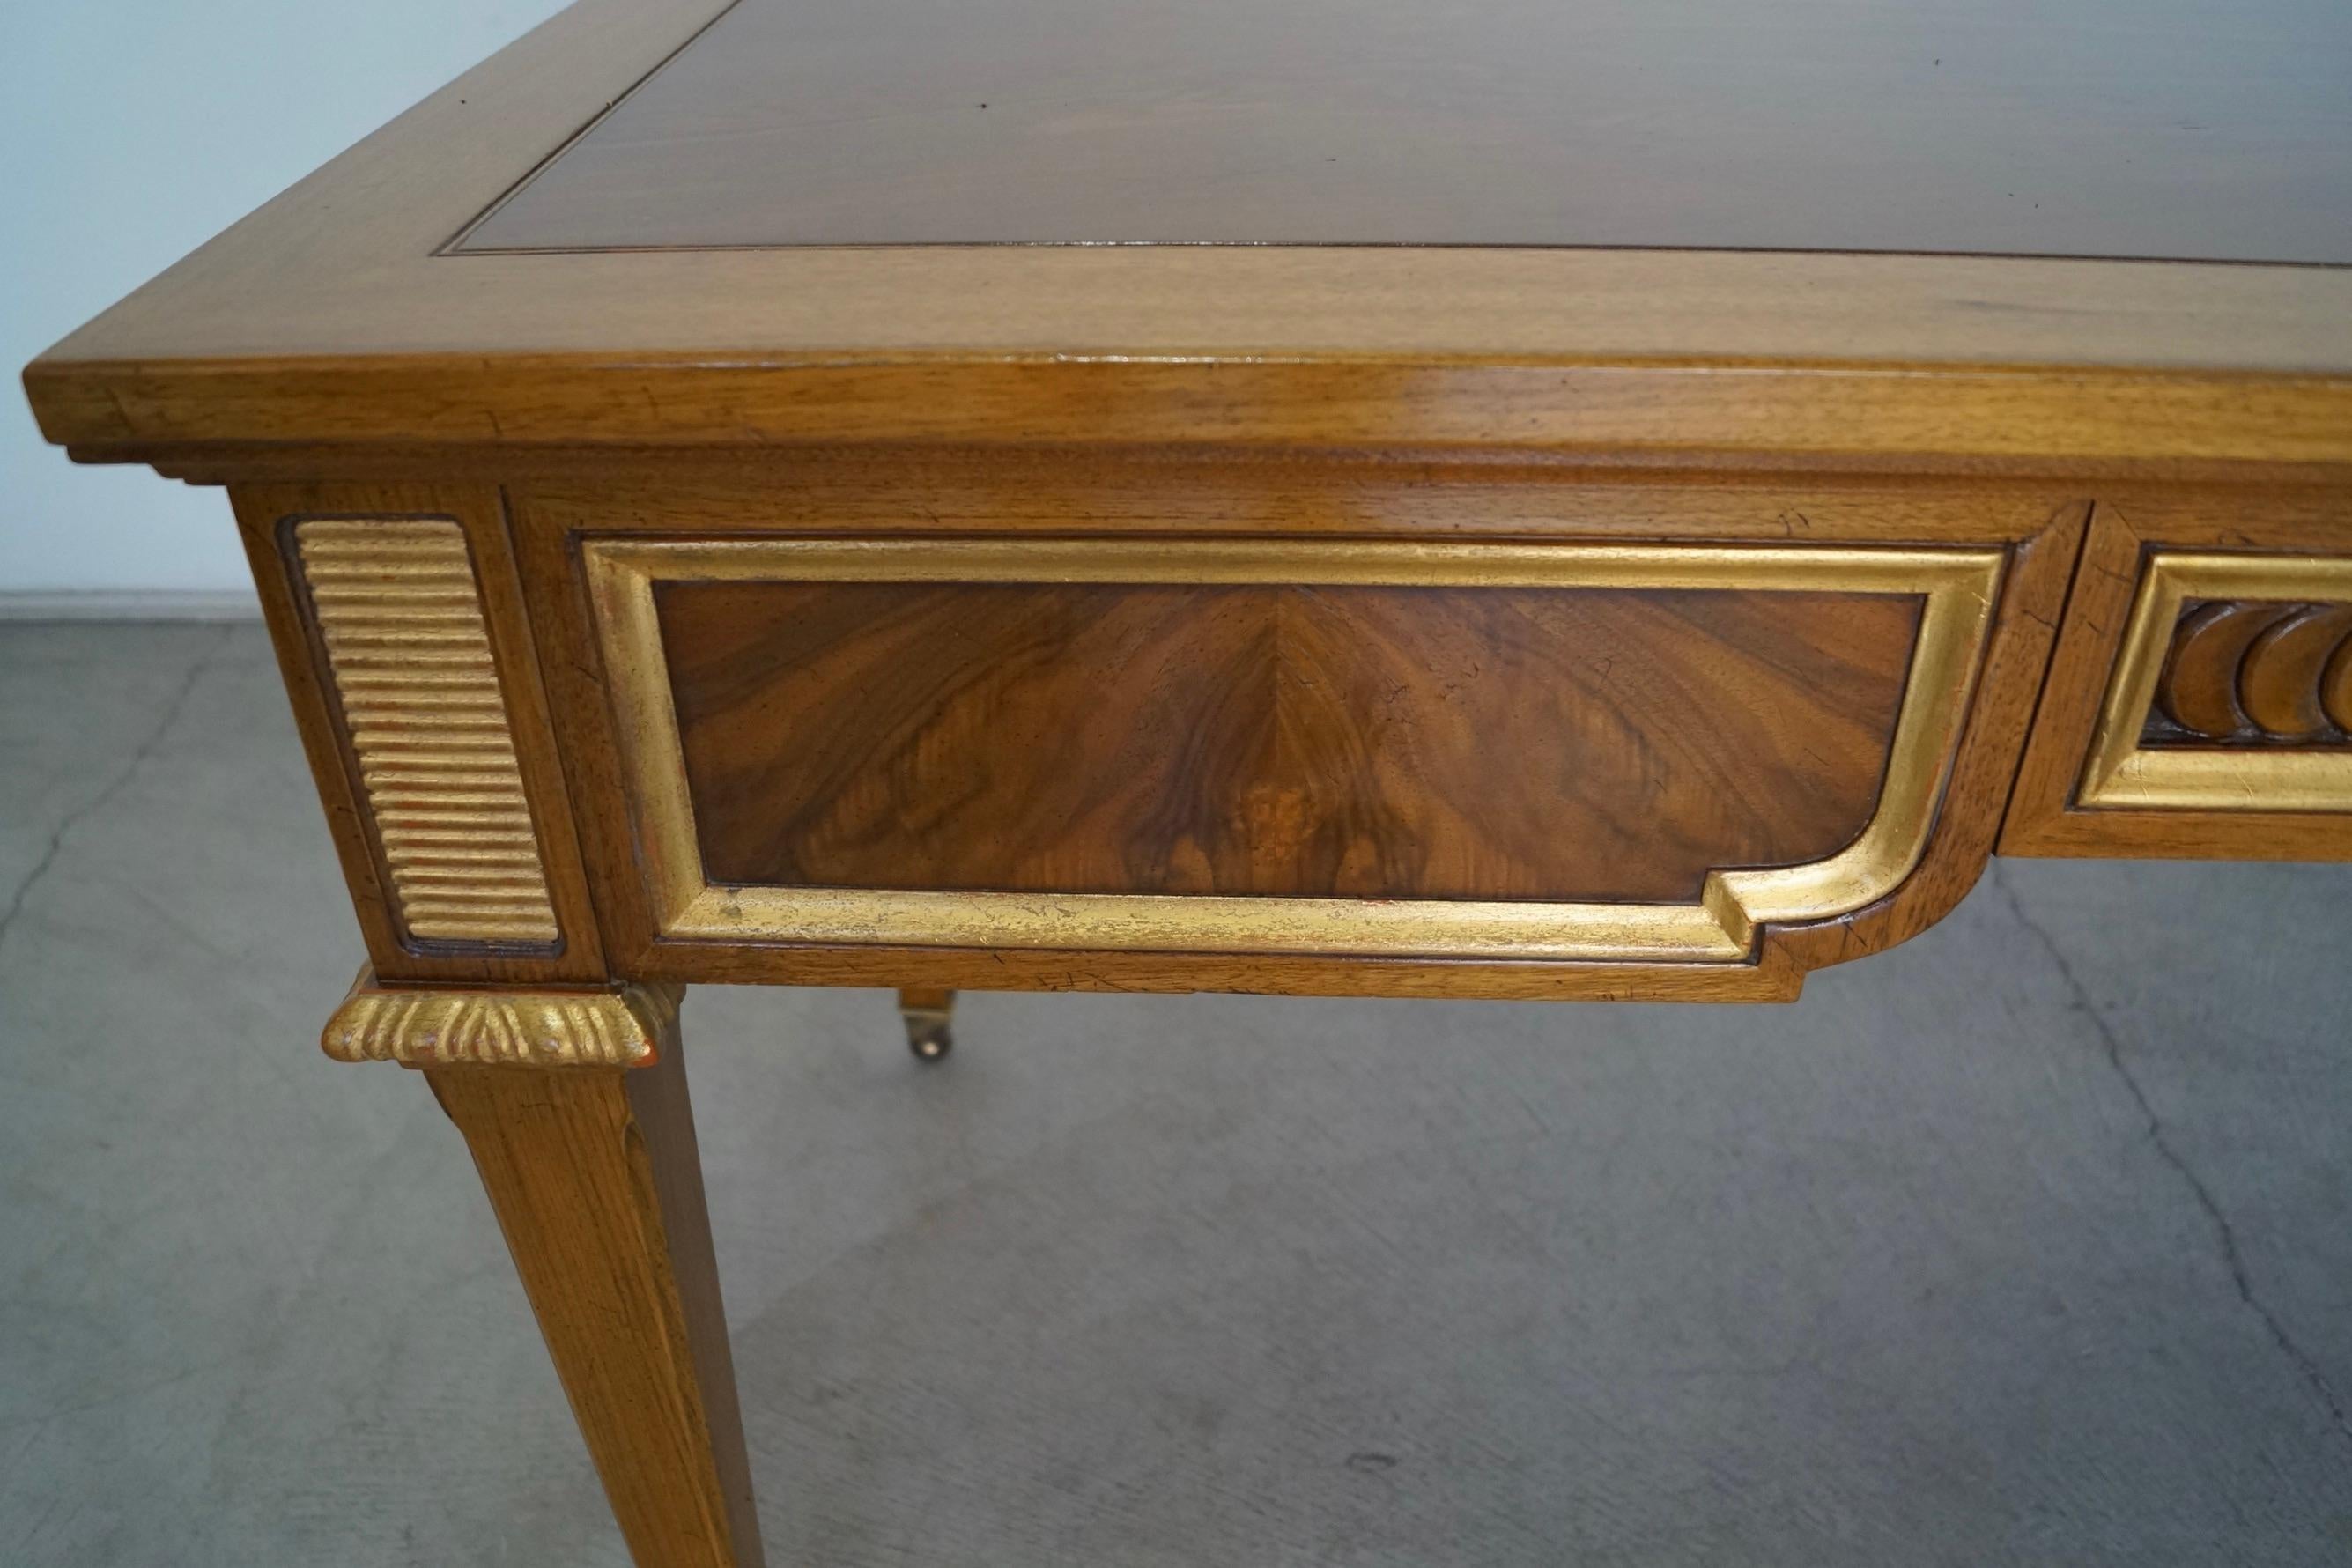 1960s Hollywood Regency Neoclassical Revival Karges Writing Desk For Sale 3